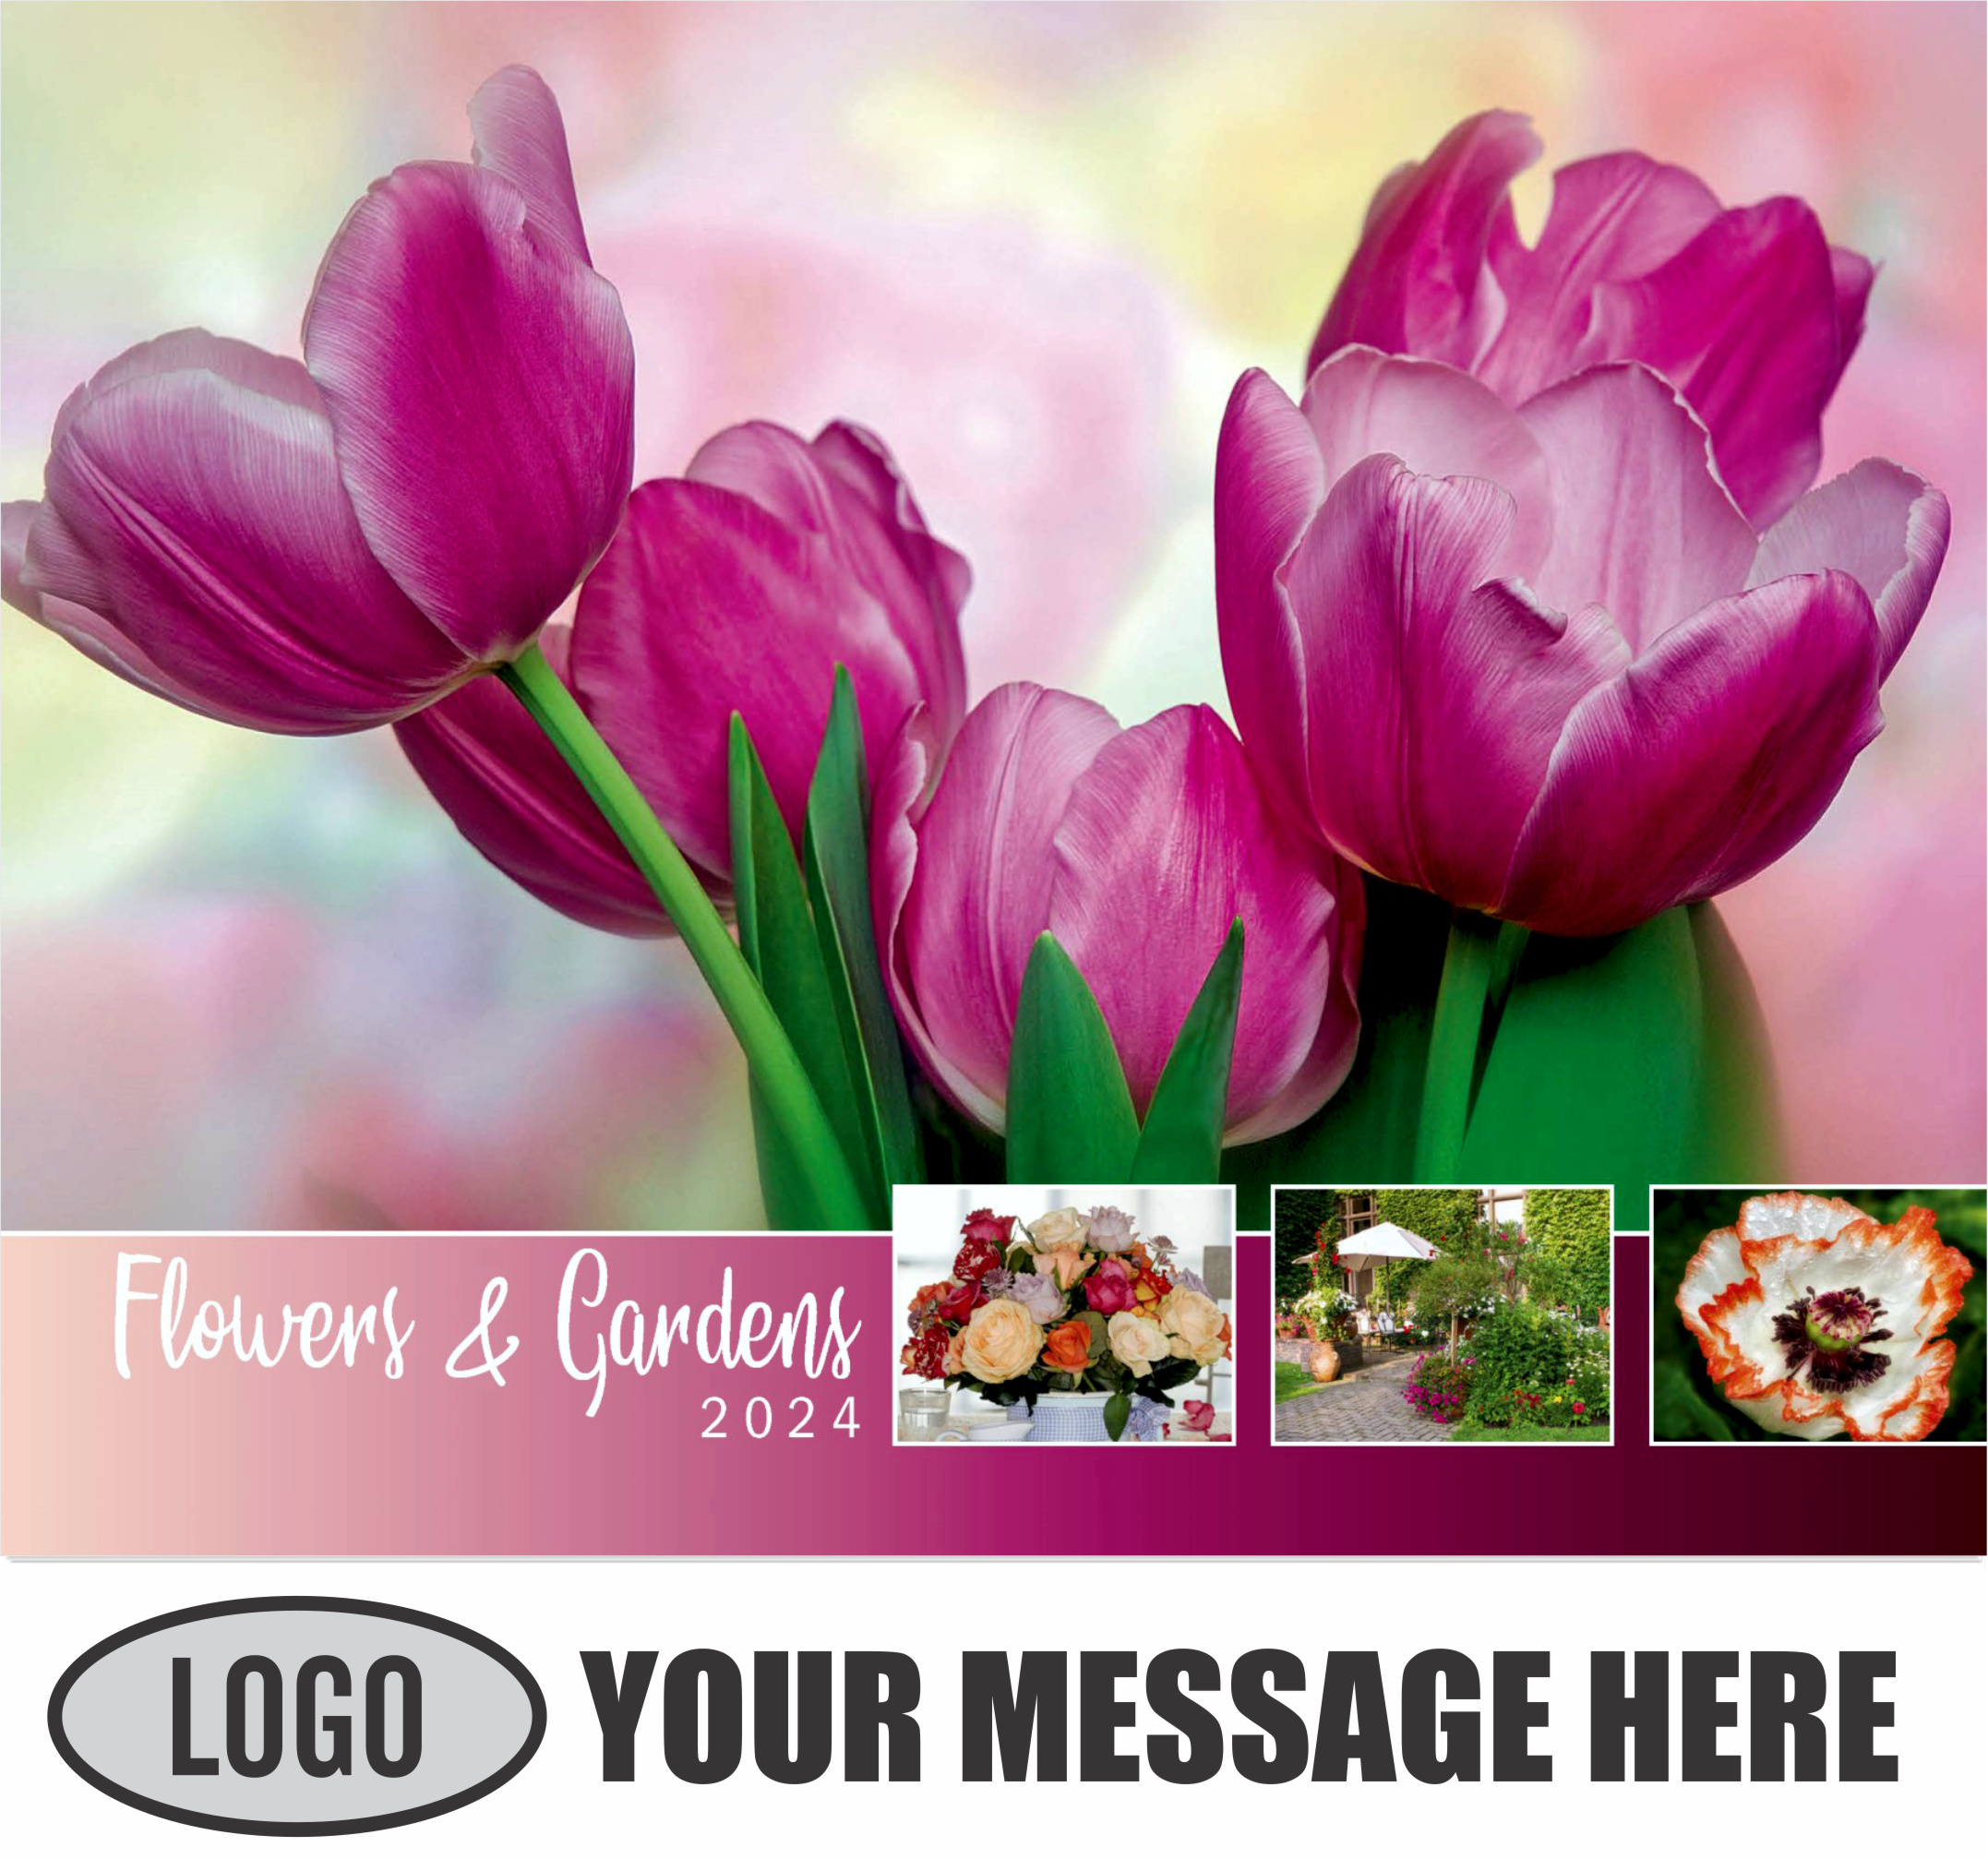 2024 Business Promo Calendars Flowers and Gardens low as 65¢